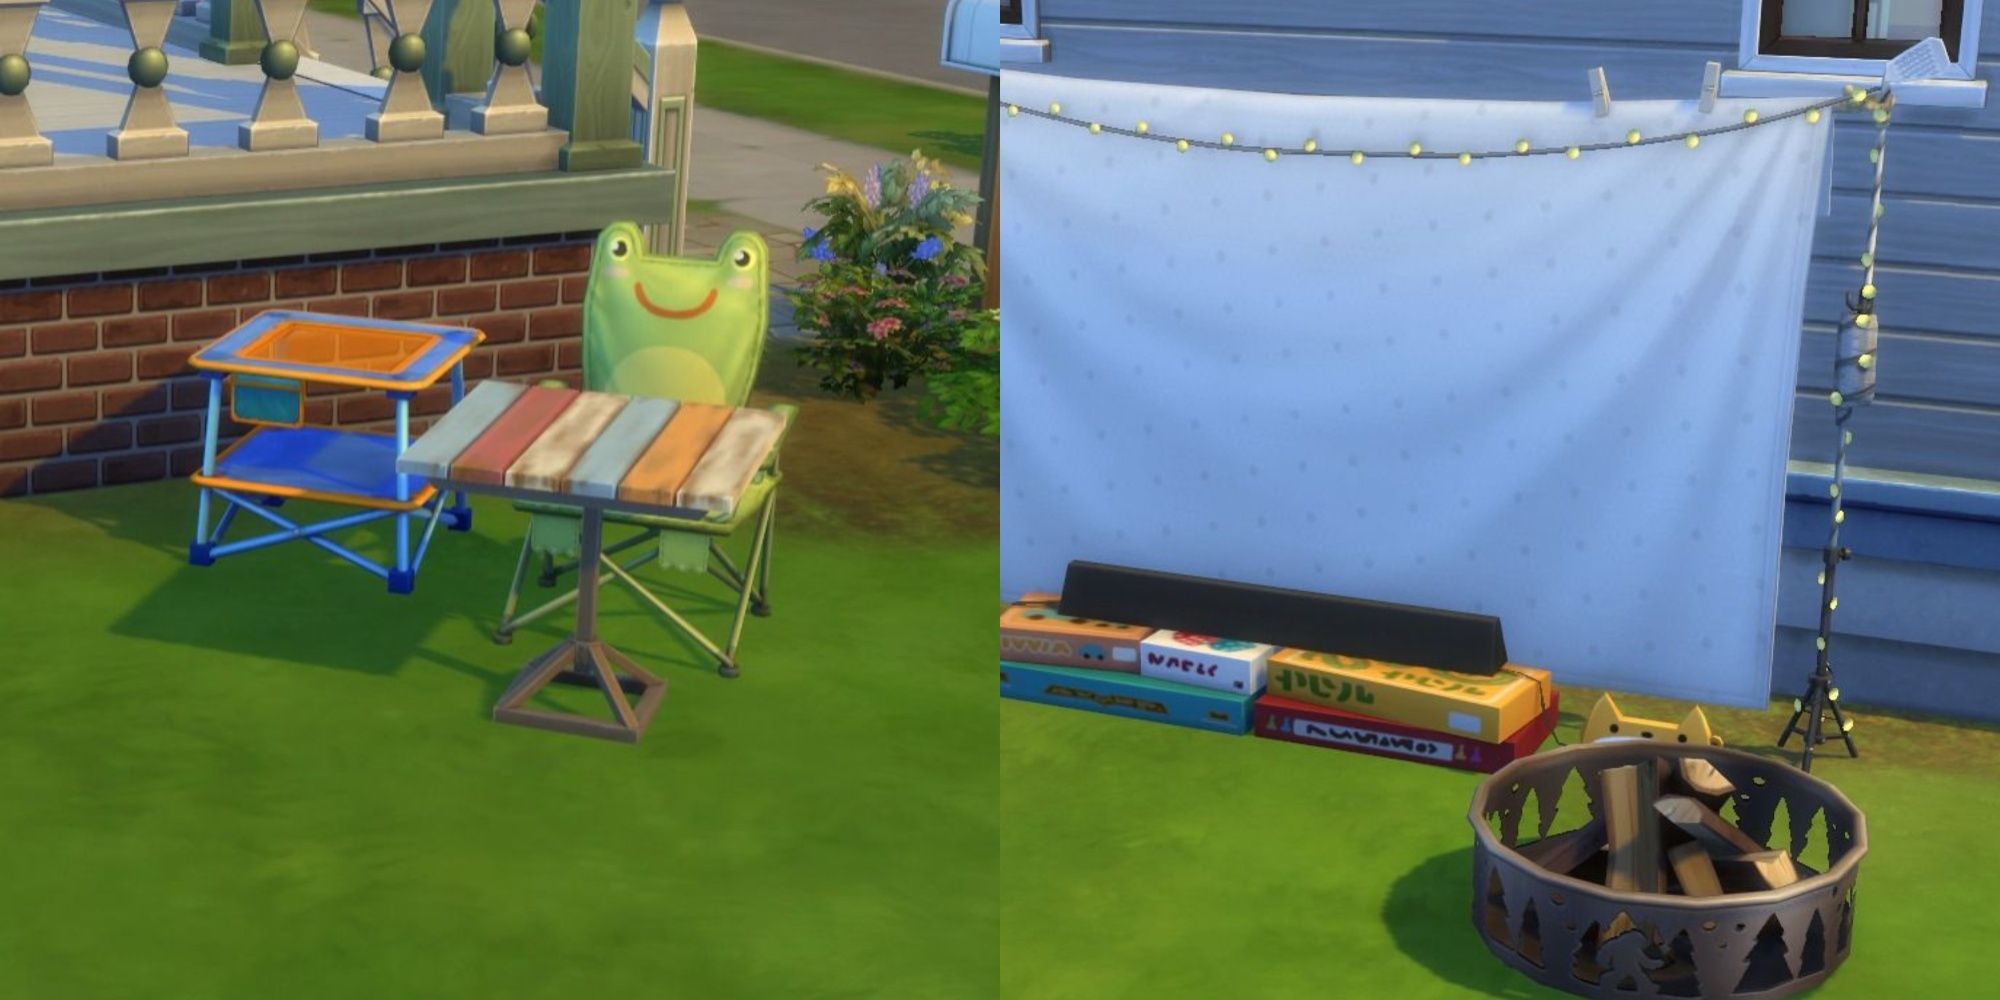 The Sims 4 Little Campers Kit Split Image Of Froggy Chair And A Fire Pit